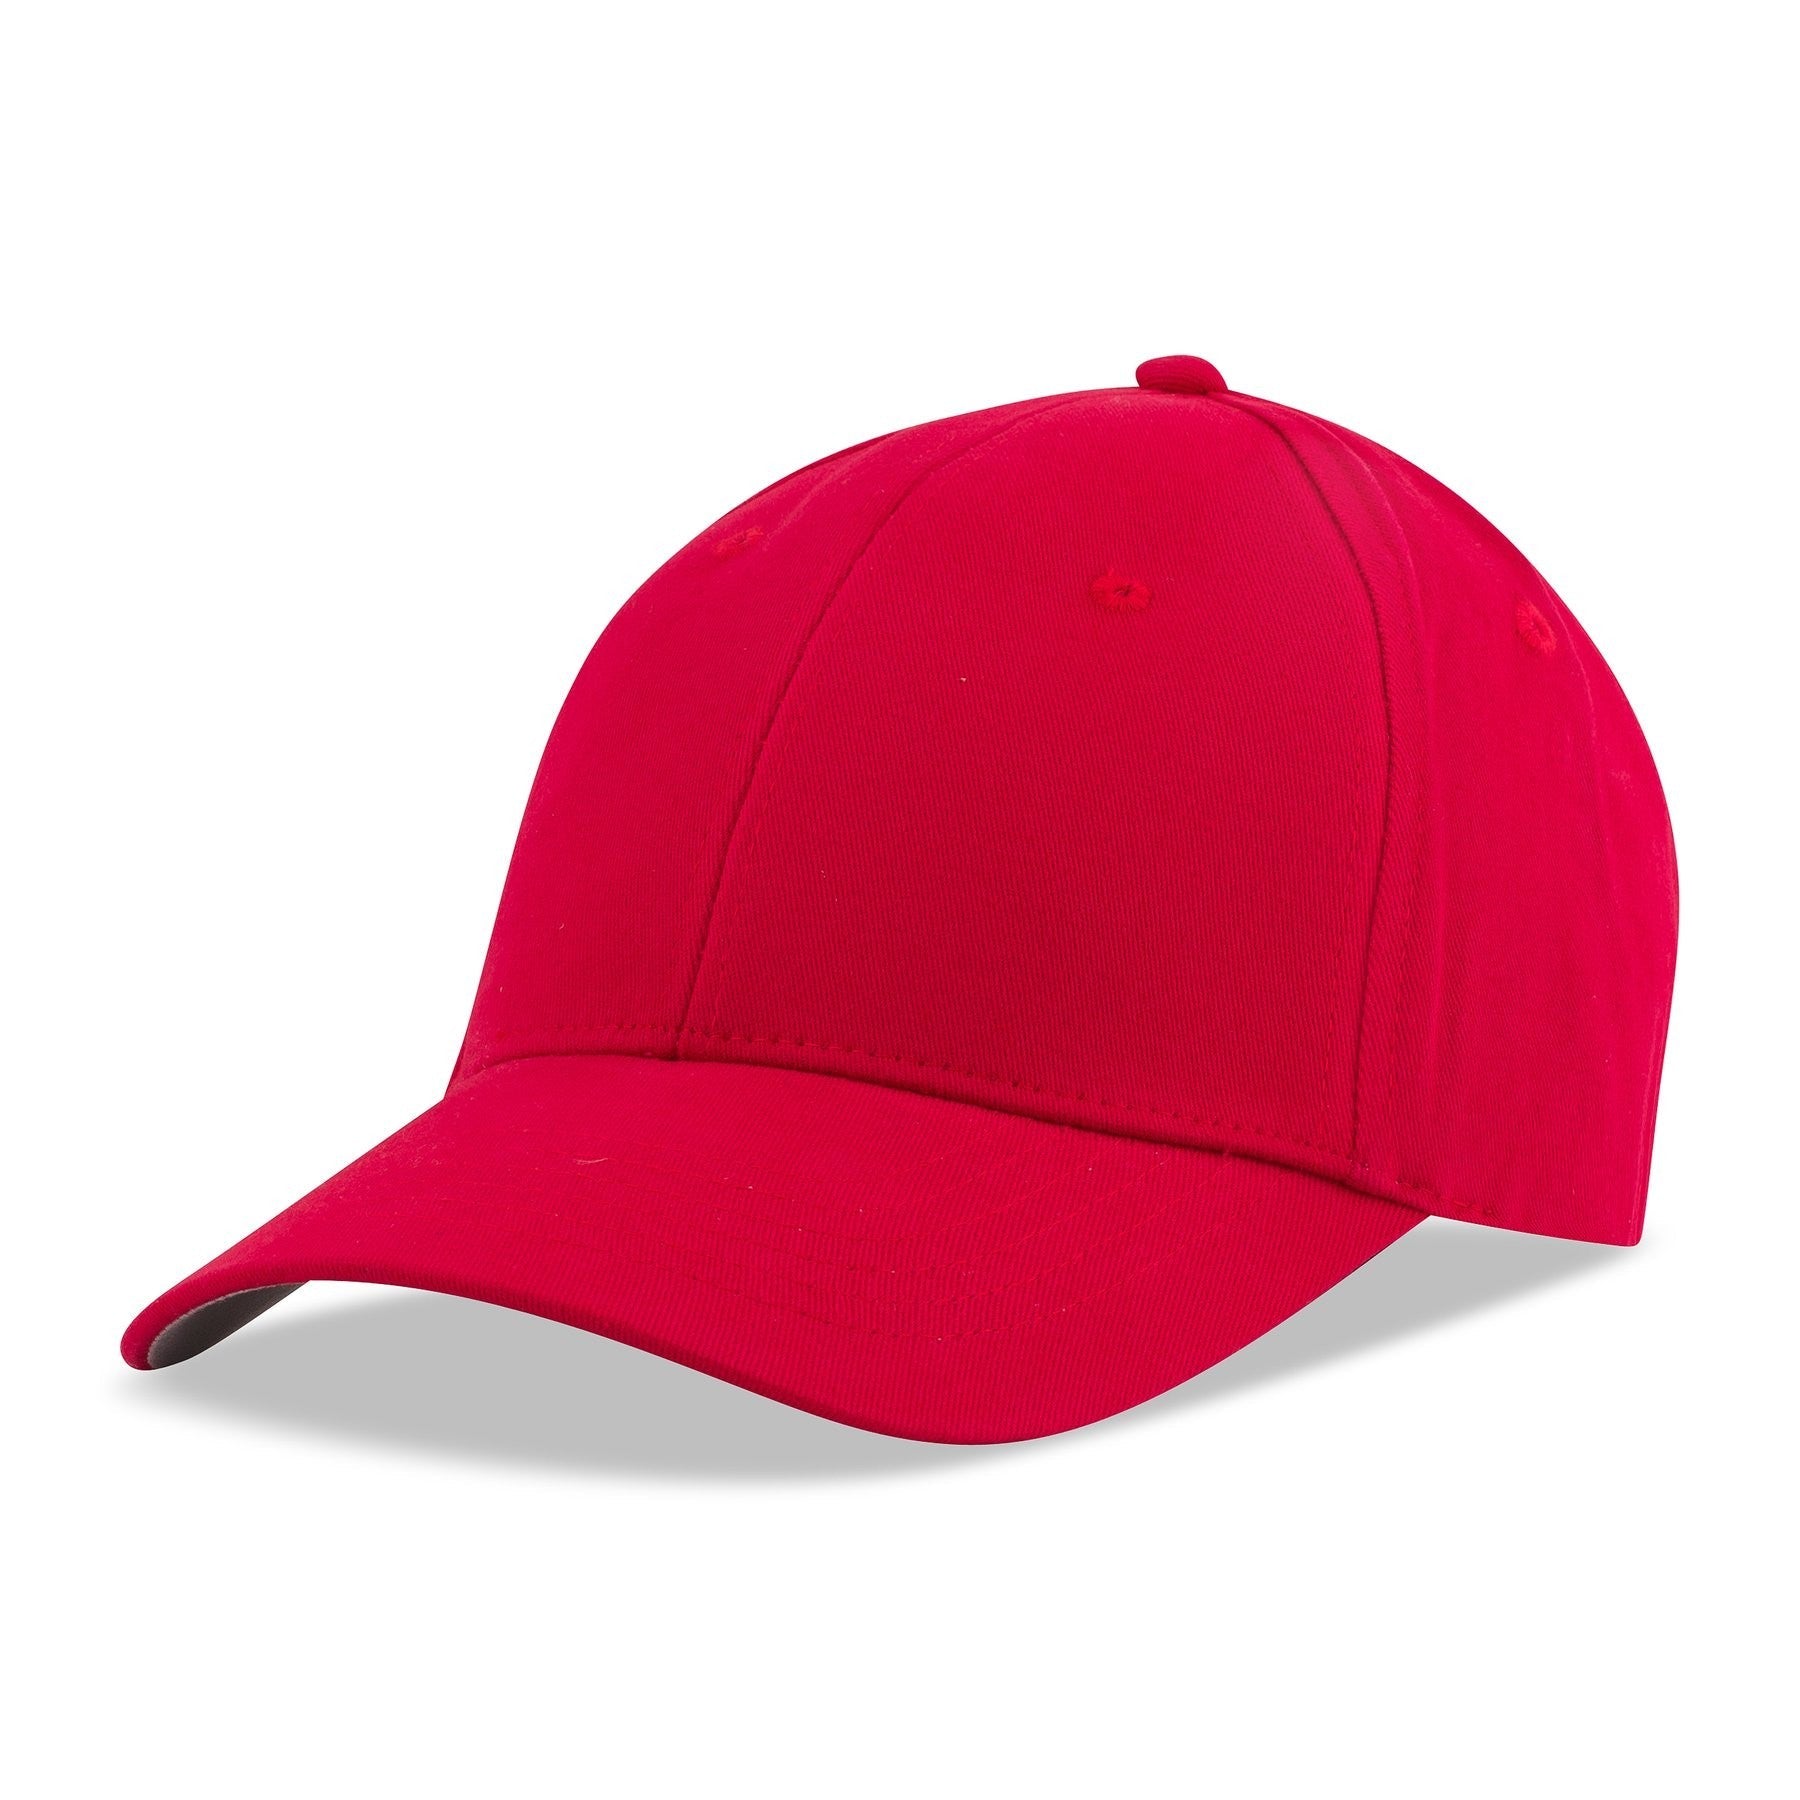 3000 Nu-Fit Pro-Style Cotton Spandex Fitted Cap - Budget Promotion Headware CA$ 18.39 Red